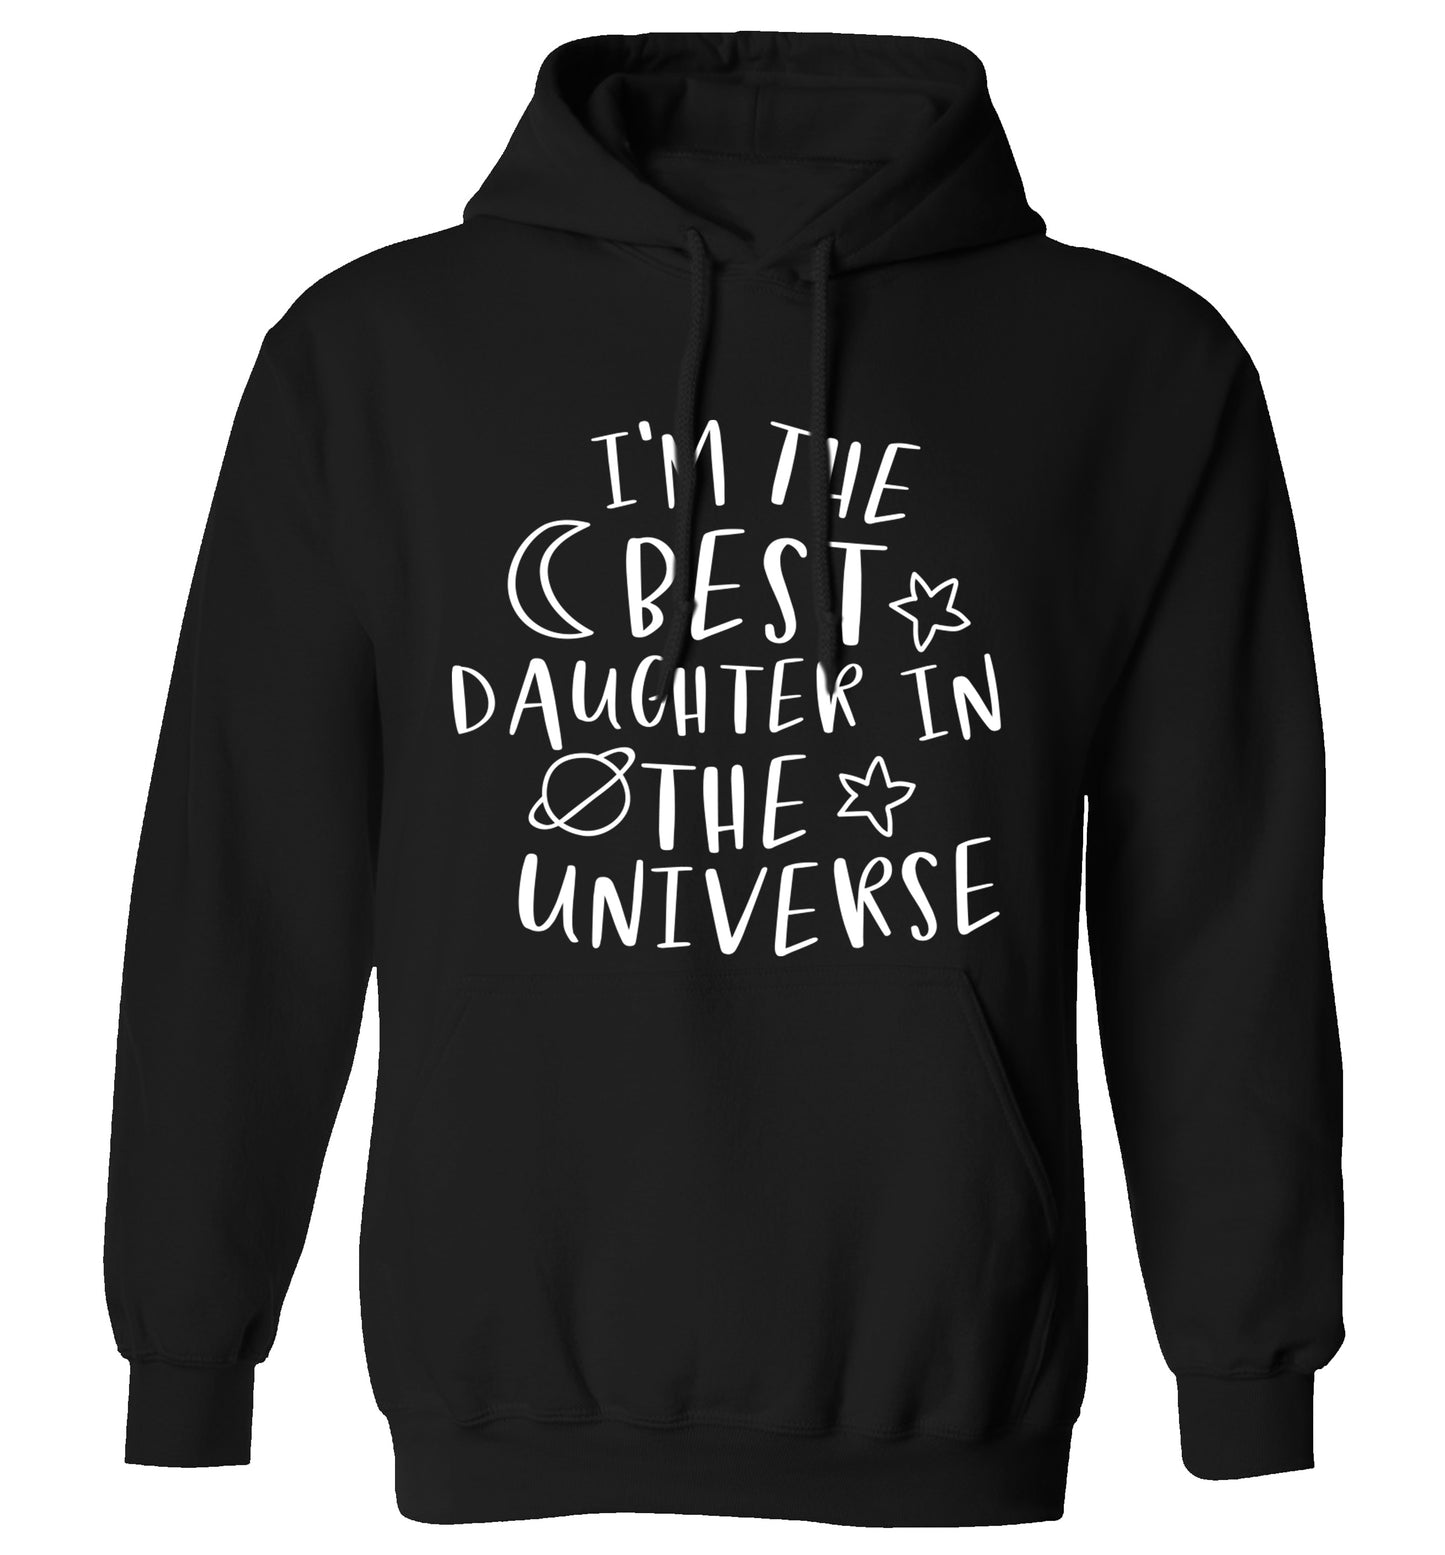 I'm the best daughter in the universe adults unisex black hoodie 2XL